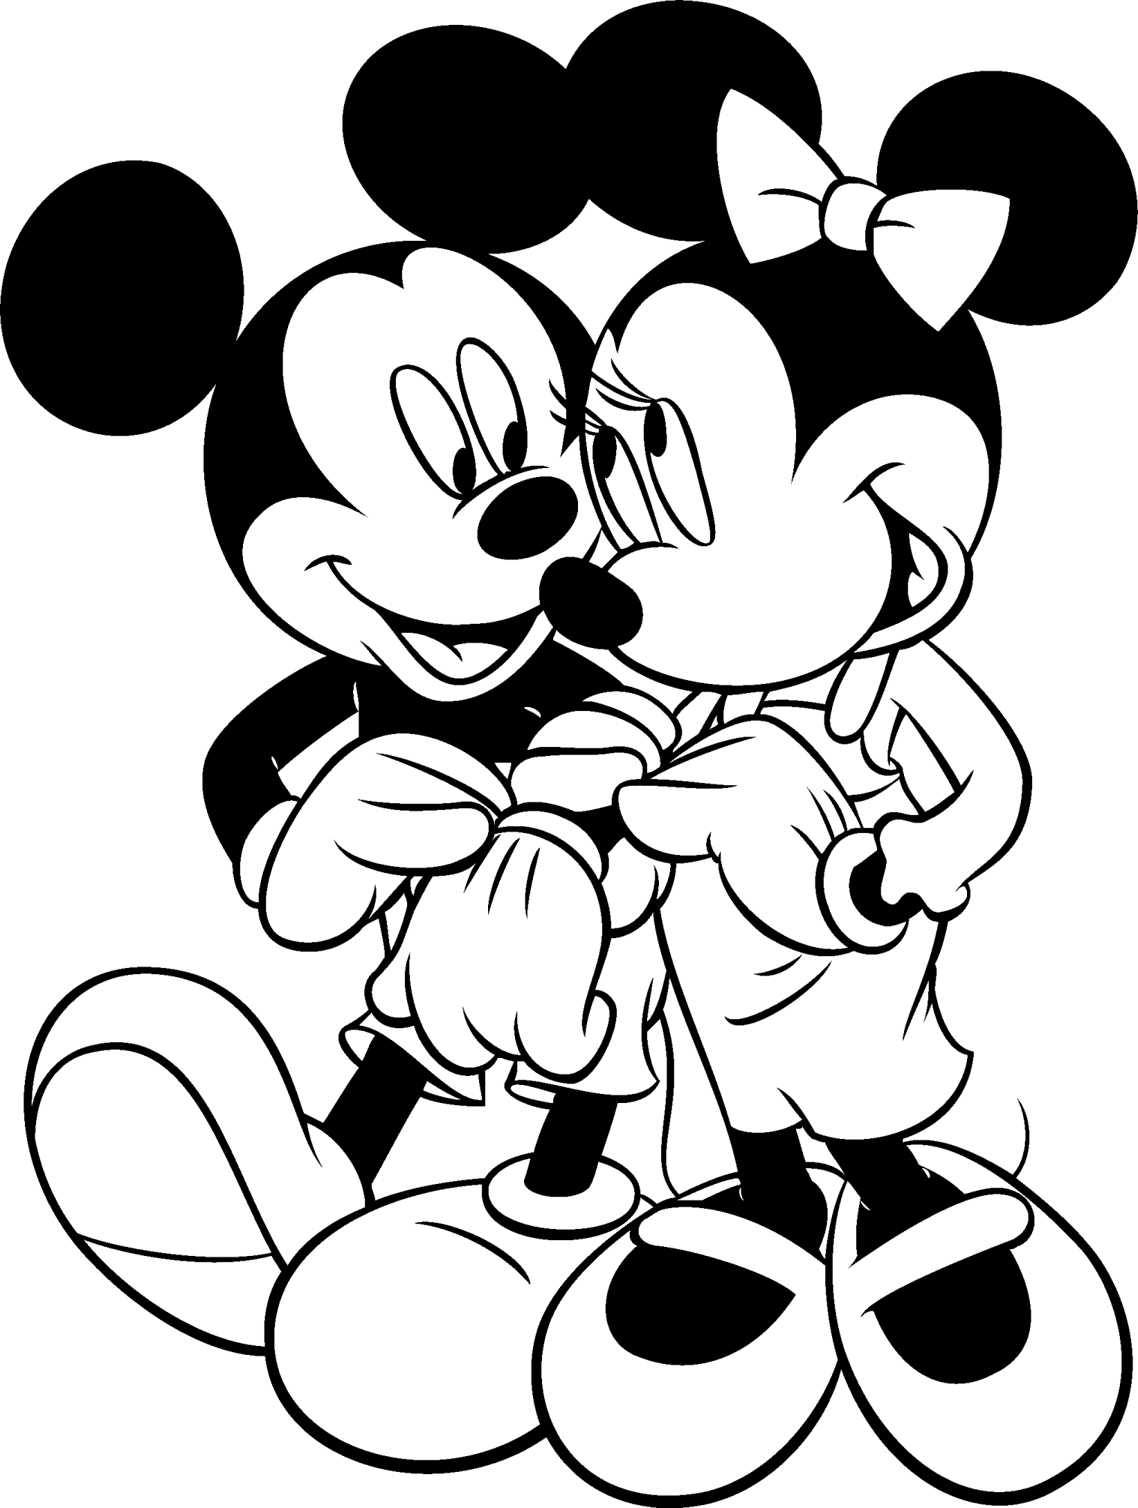 Download Disney Coloring Pages: Disney Valentines Coloring Pages